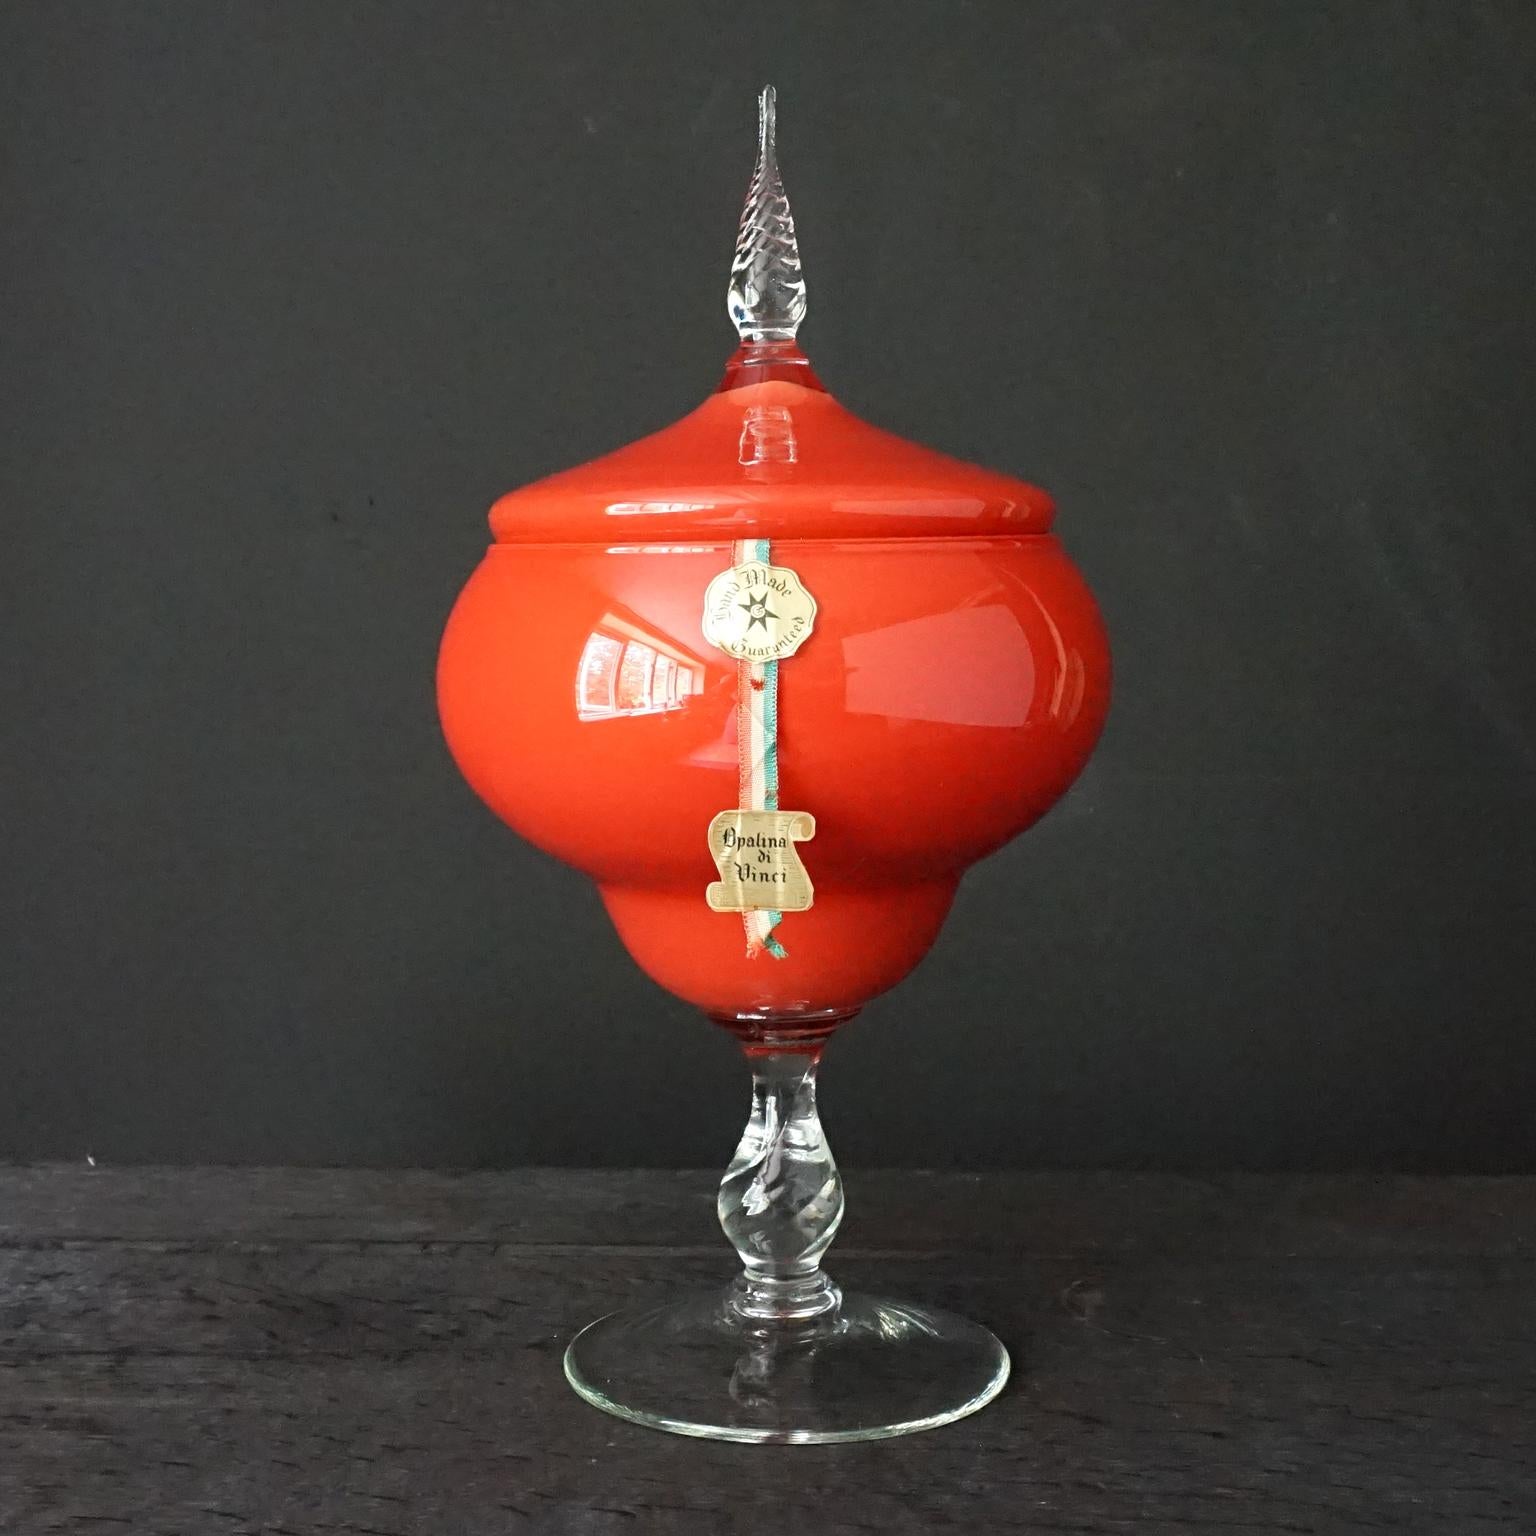 Large MCM Mid-Century-Modern Italian VNC Opalina di Vinci 2-layers cased glass candy or apothecary Jar in the most peculiar subdued bright tomato red colour I've ever seen. 
Usually cased glass has a layer of white, this jar hasn't. There are two